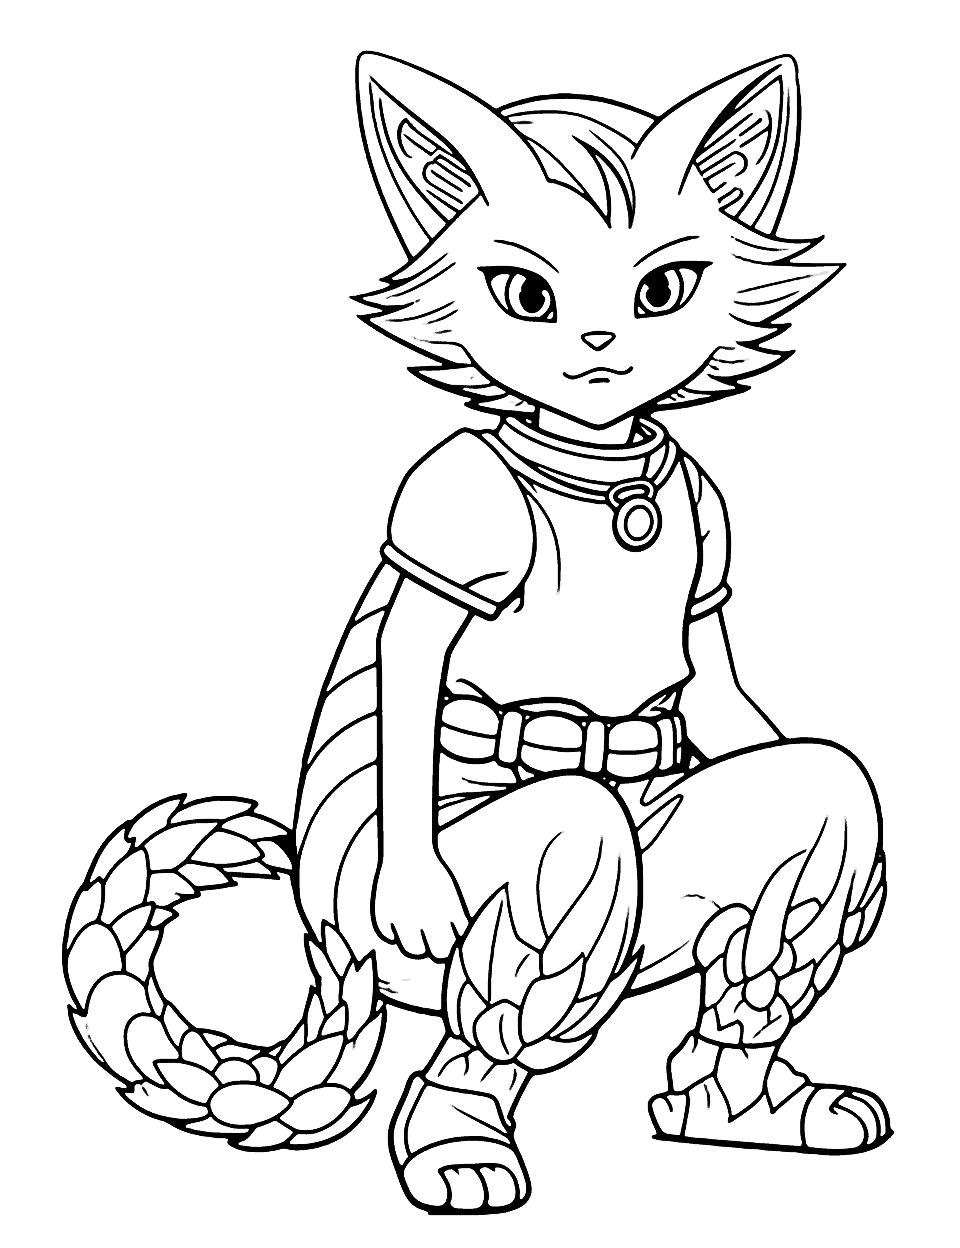 Beautiful Anime Cat Coloring Page - A beautiful anime cat lounging comfortably, with intricate designs on its fur.